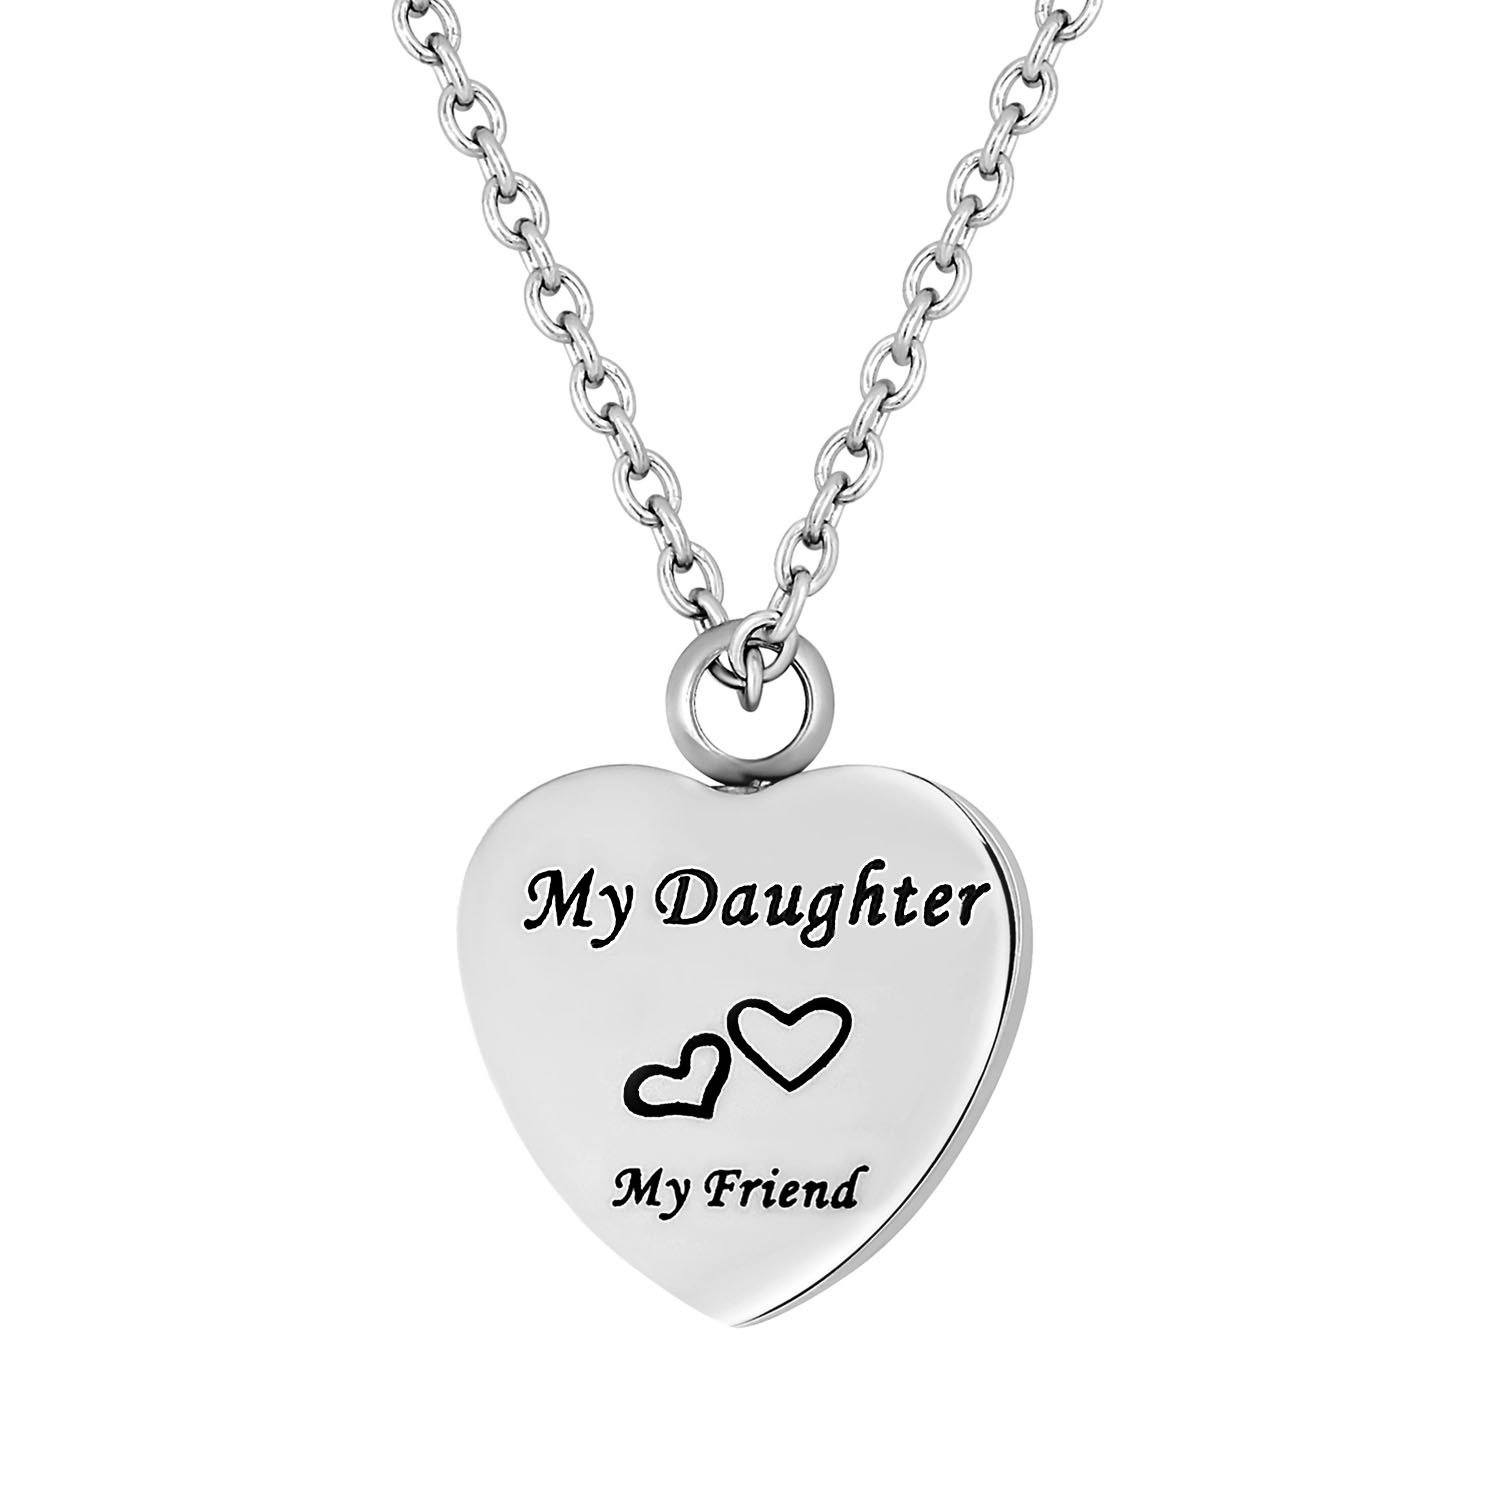 Cremation Jewelry Necklace for Ashes - My Daughter